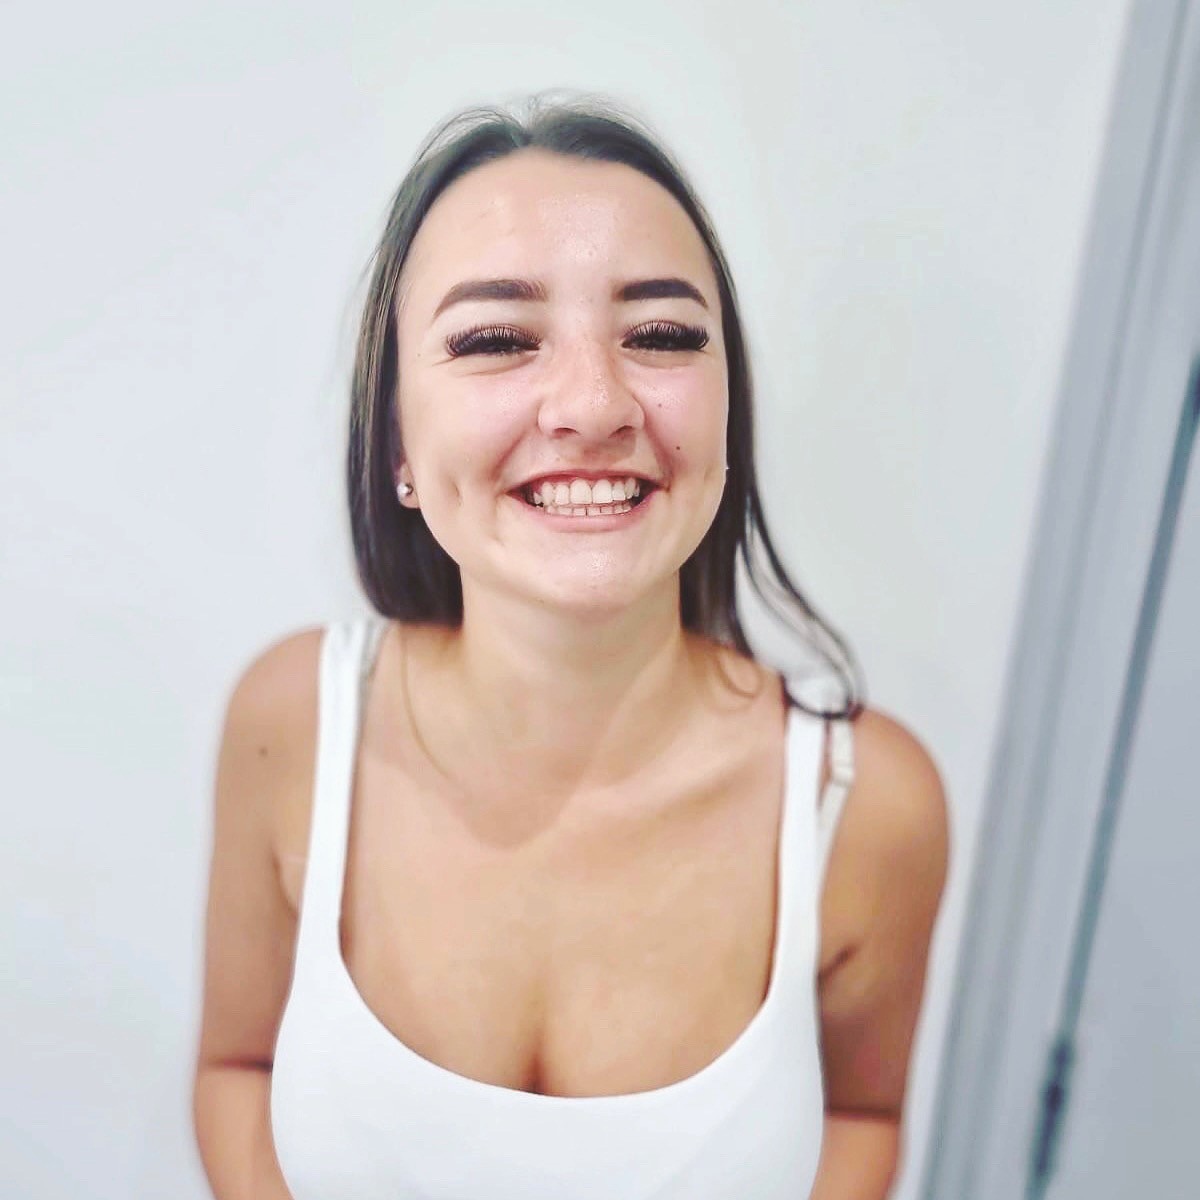 The BIGGEST smile 😍

And well deserved after 24 months in fixed braces.

Orthodontic treatment isn't a quick fix, but it's undoubtedly worth the wait! #hellonewsmile

#specialistorthodontist
🤳 01273 203514
💻 splashorthodontics.co.uk